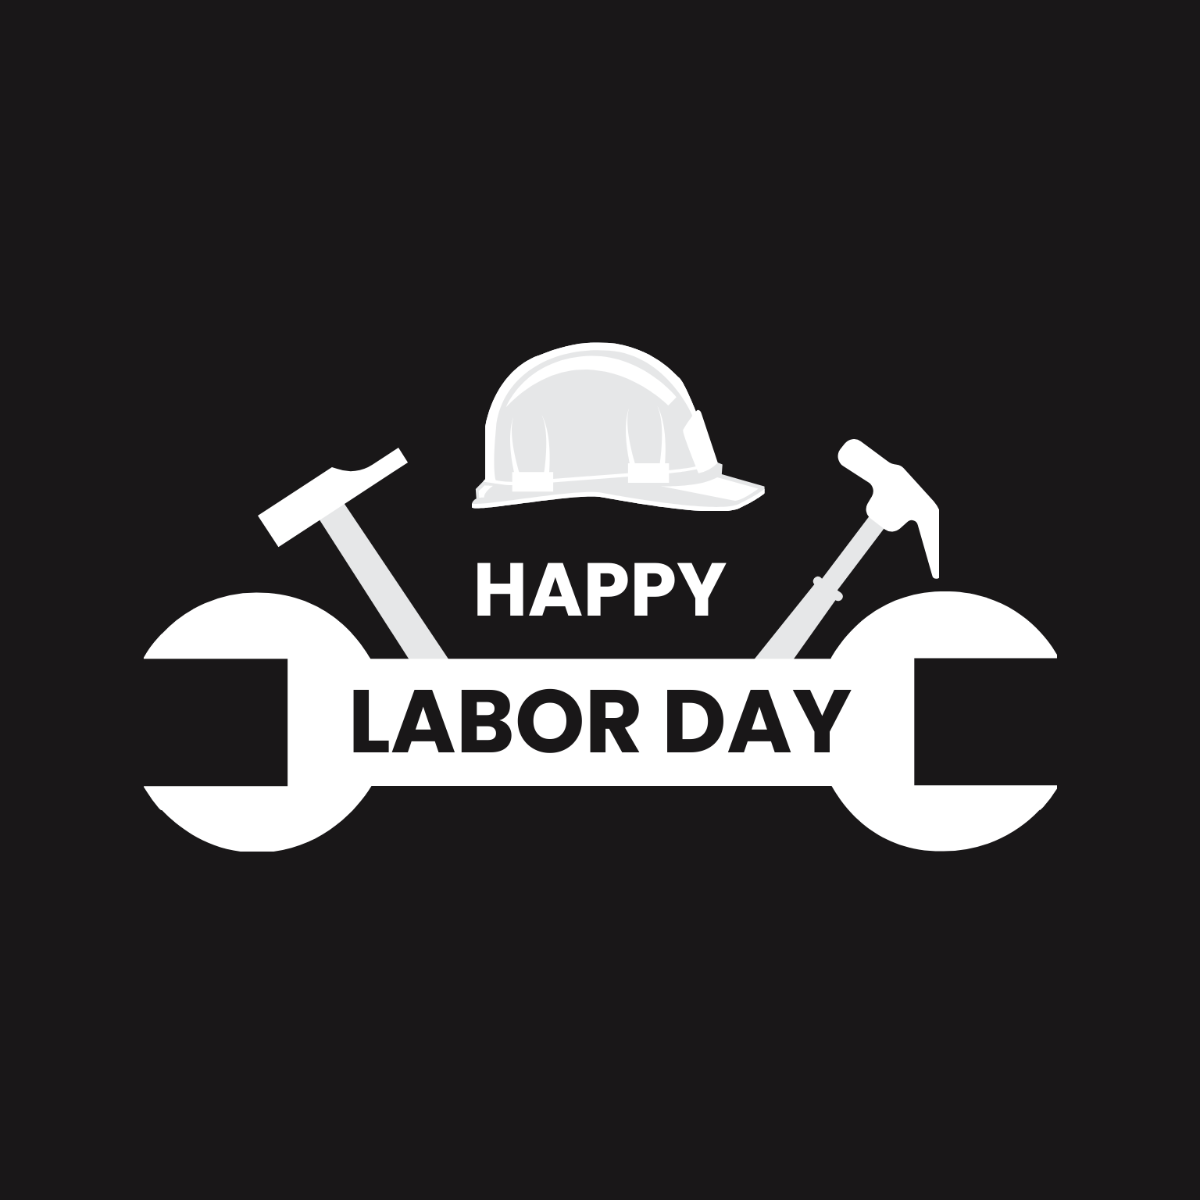 Free Black And White Labor Day Clipart